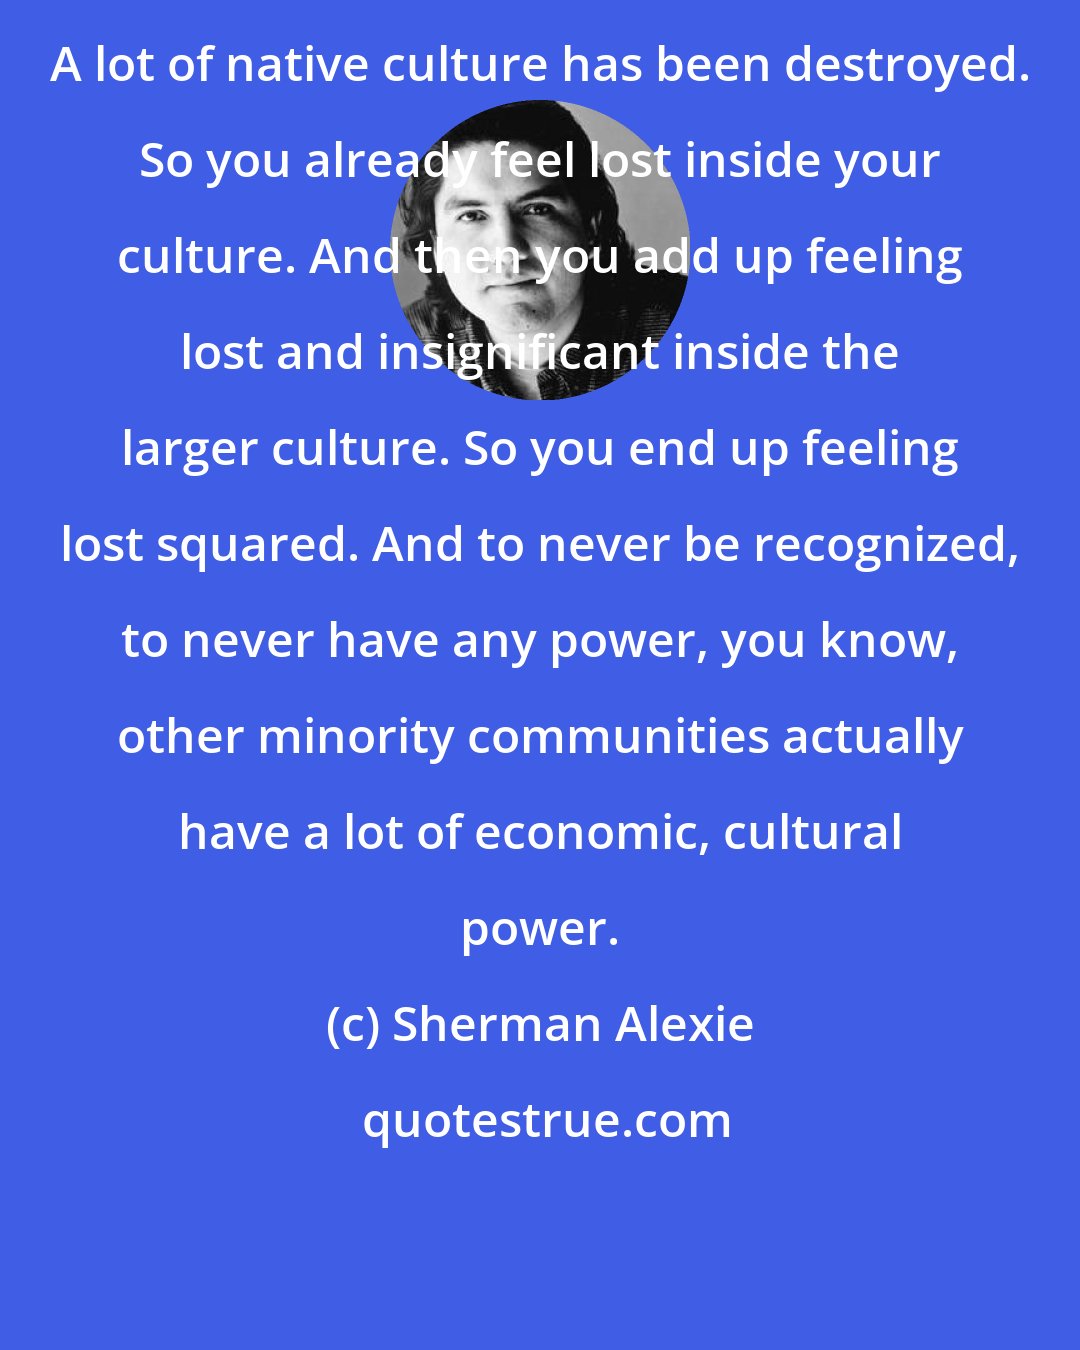 Sherman Alexie: A lot of native culture has been destroyed. So you already feel lost inside your culture. And then you add up feeling lost and insignificant inside the larger culture. So you end up feeling lost squared. And to never be recognized, to never have any power, you know, other minority communities actually have a lot of economic, cultural power.